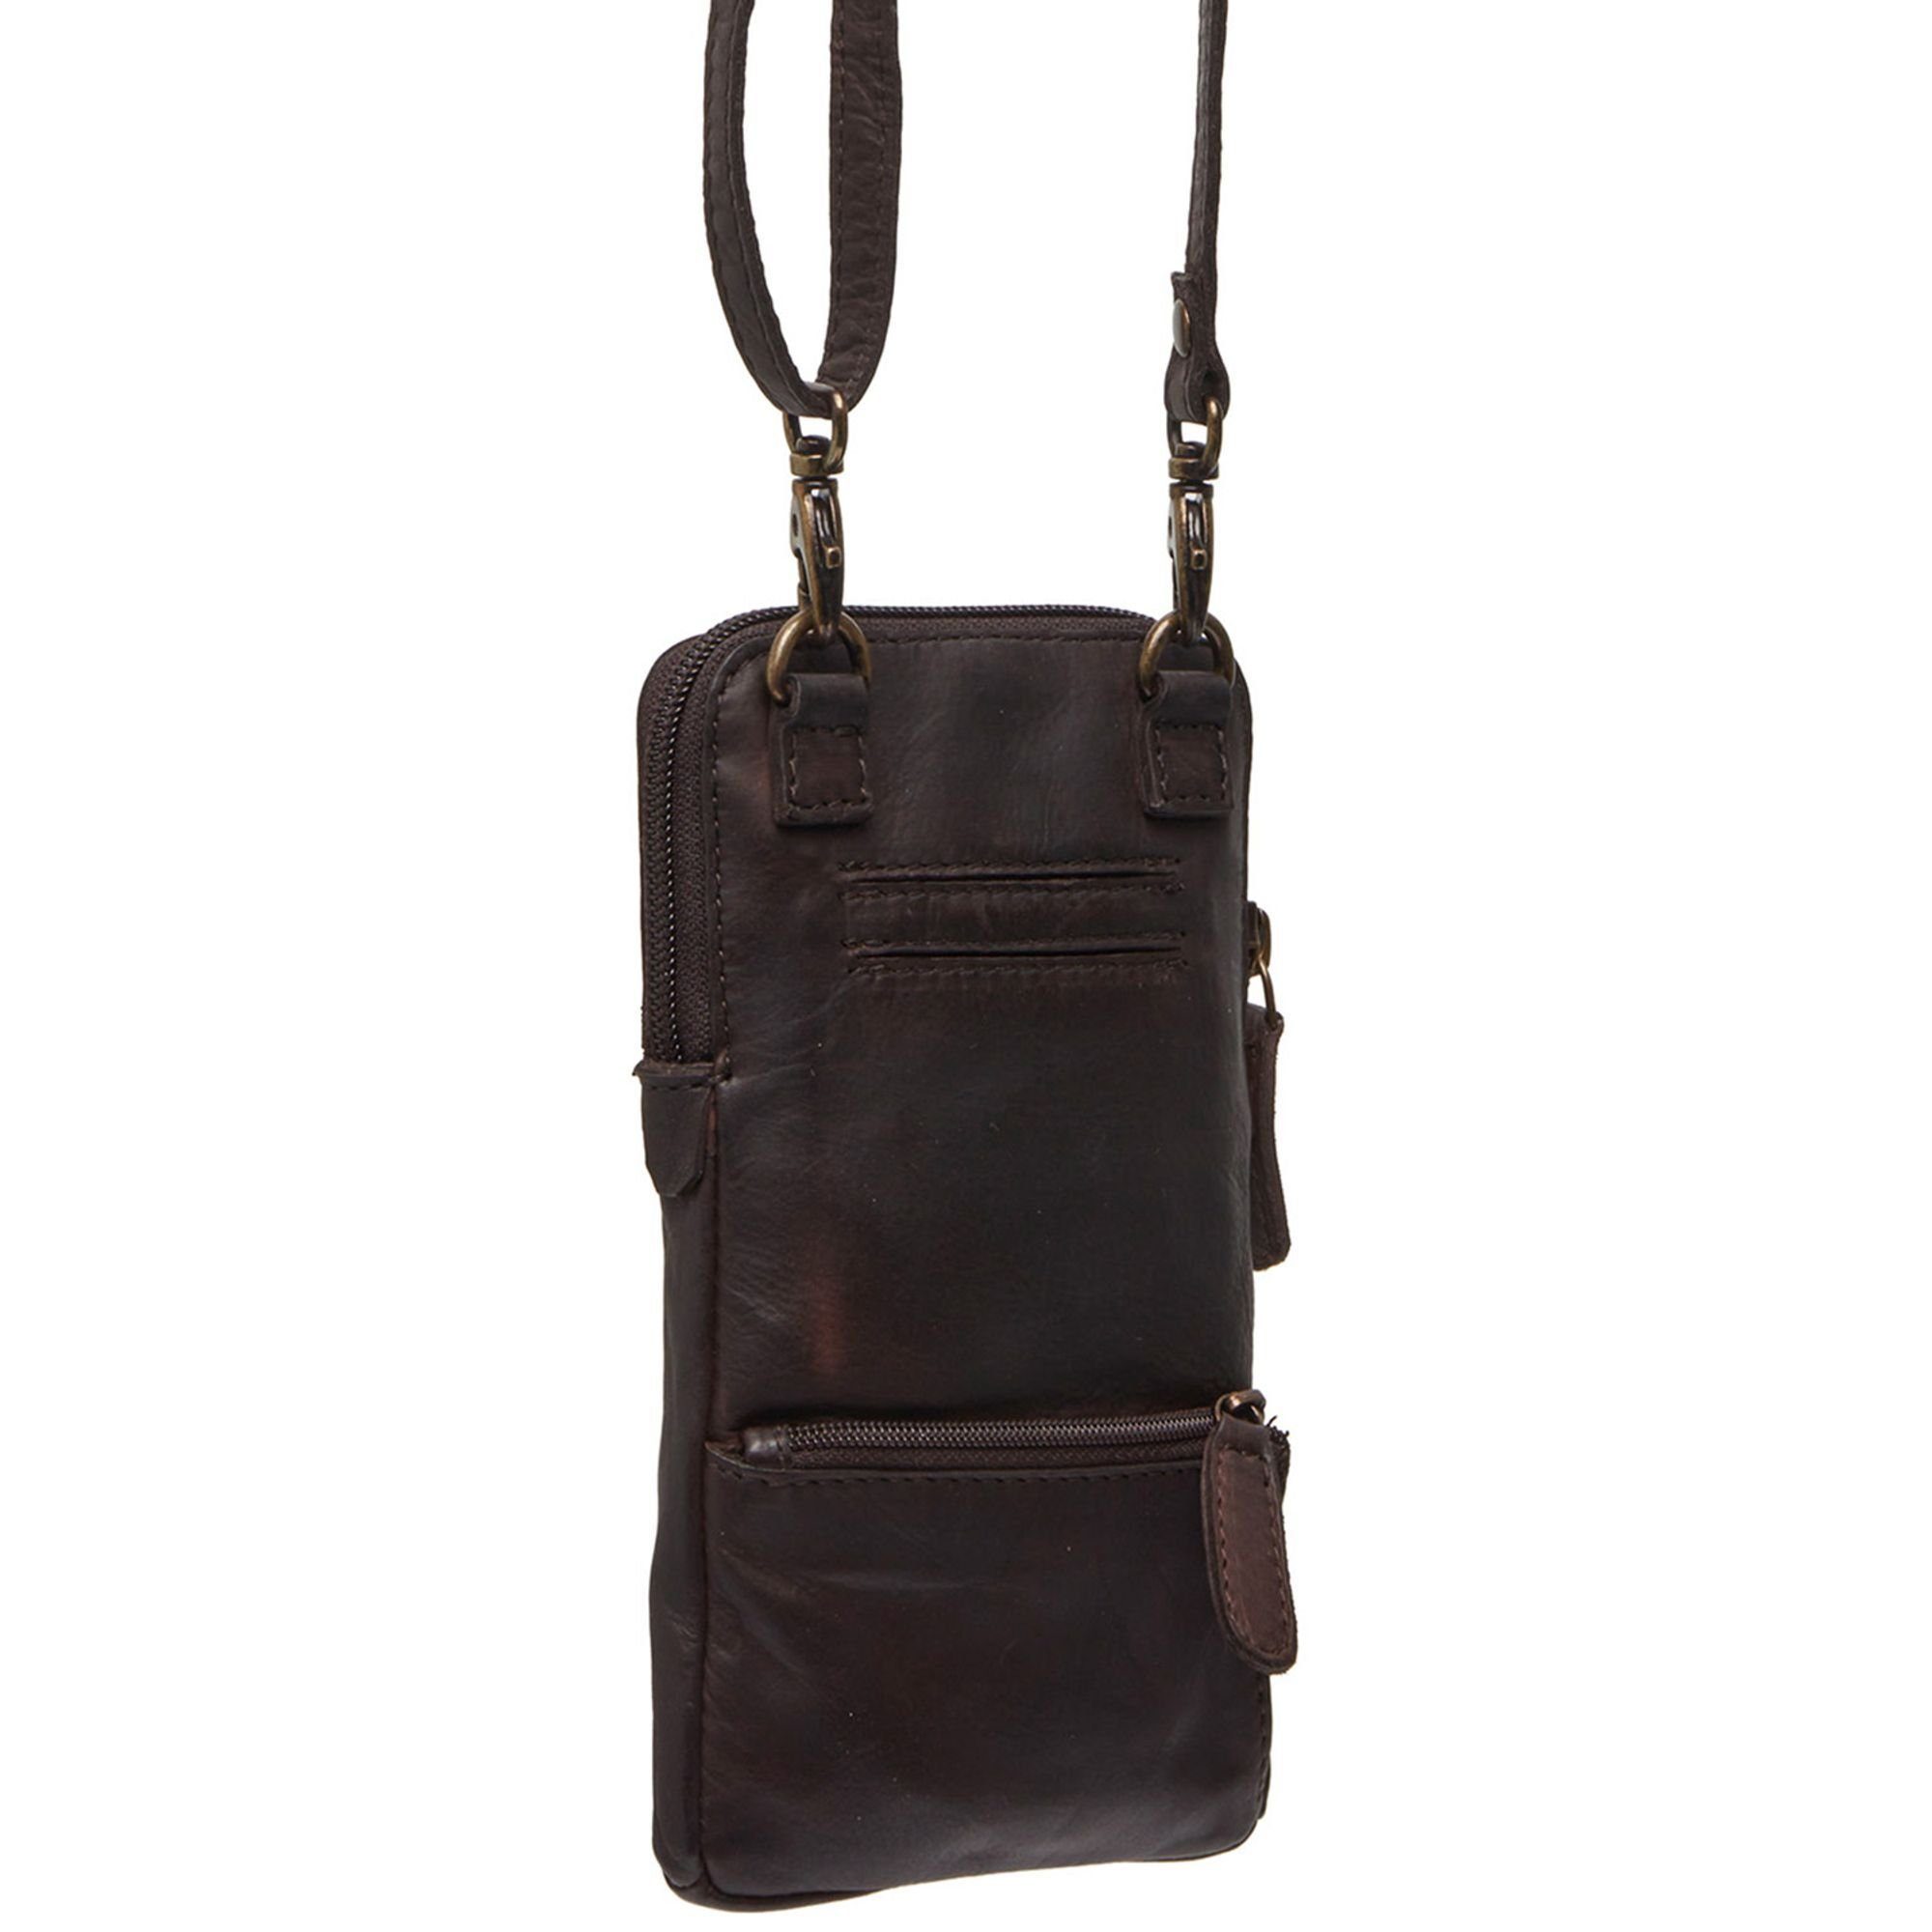 Smartphone-Hülle Chesterfield brown Leder Cuba, Brand The